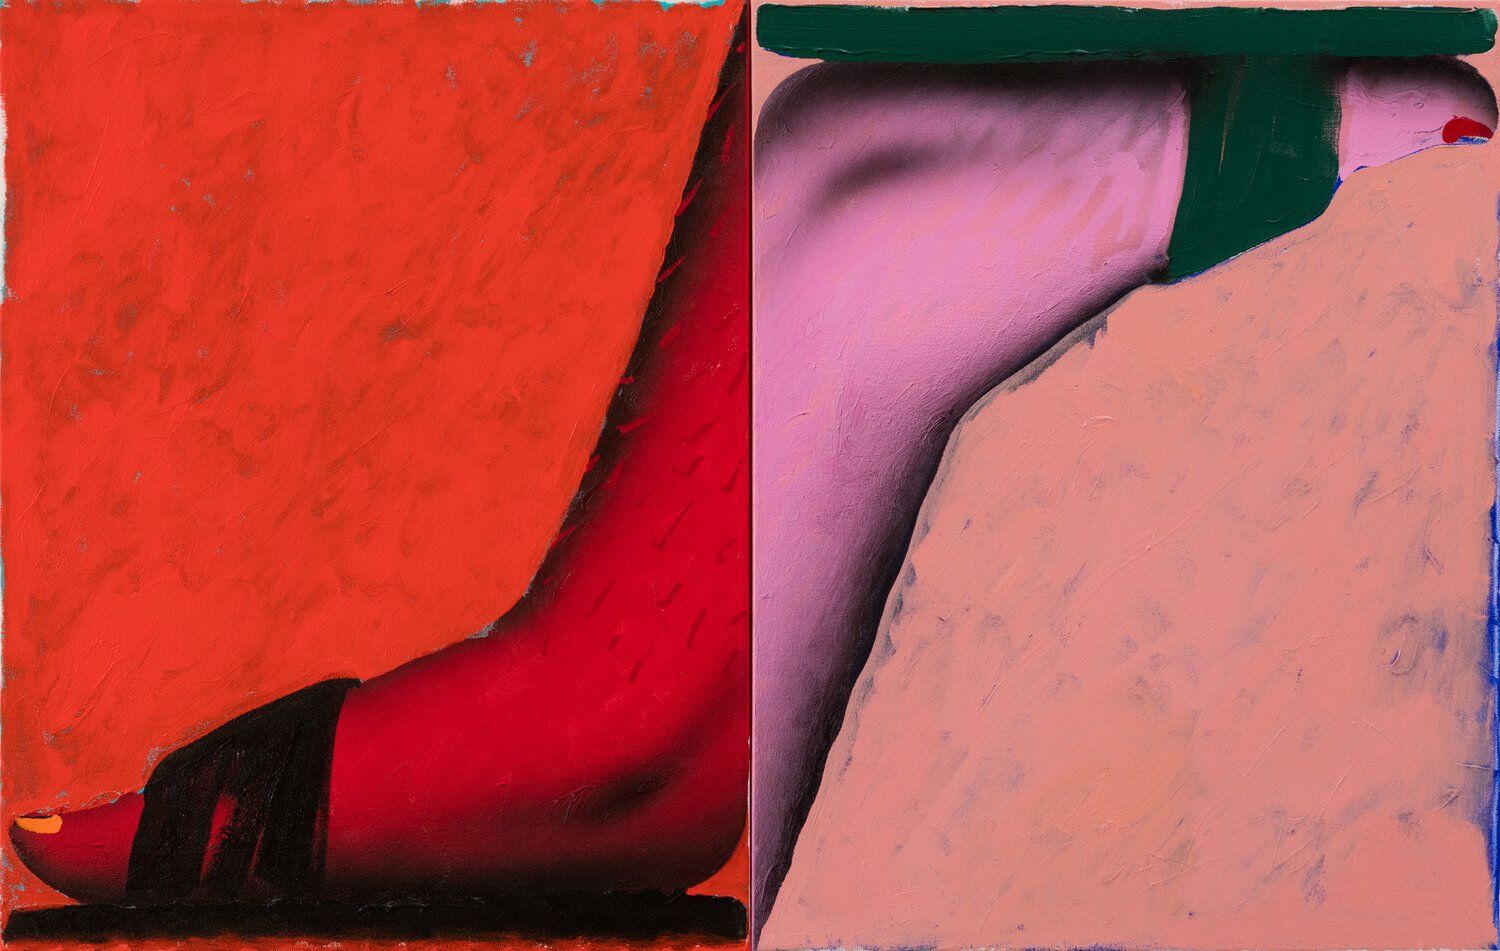 james english leary kouros feet red and pink